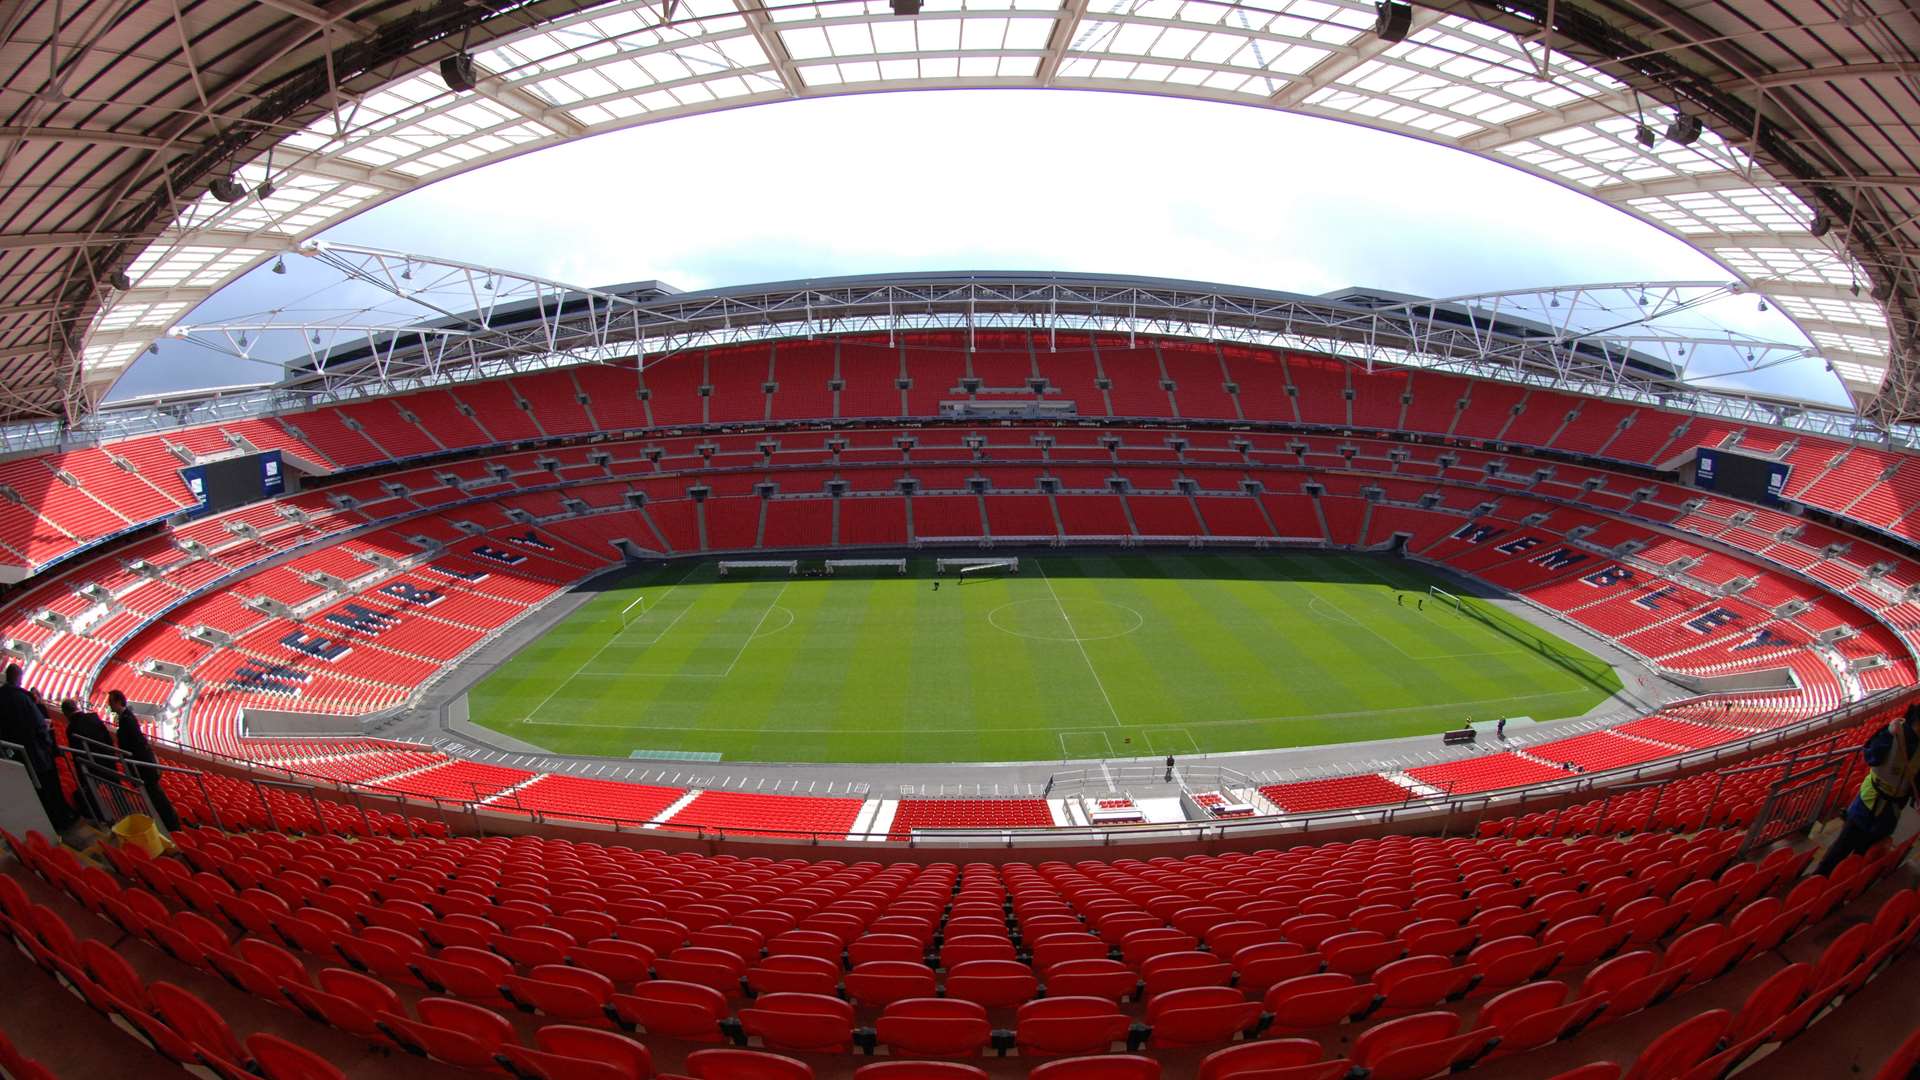 Wembley Stadium where Adele will be performing